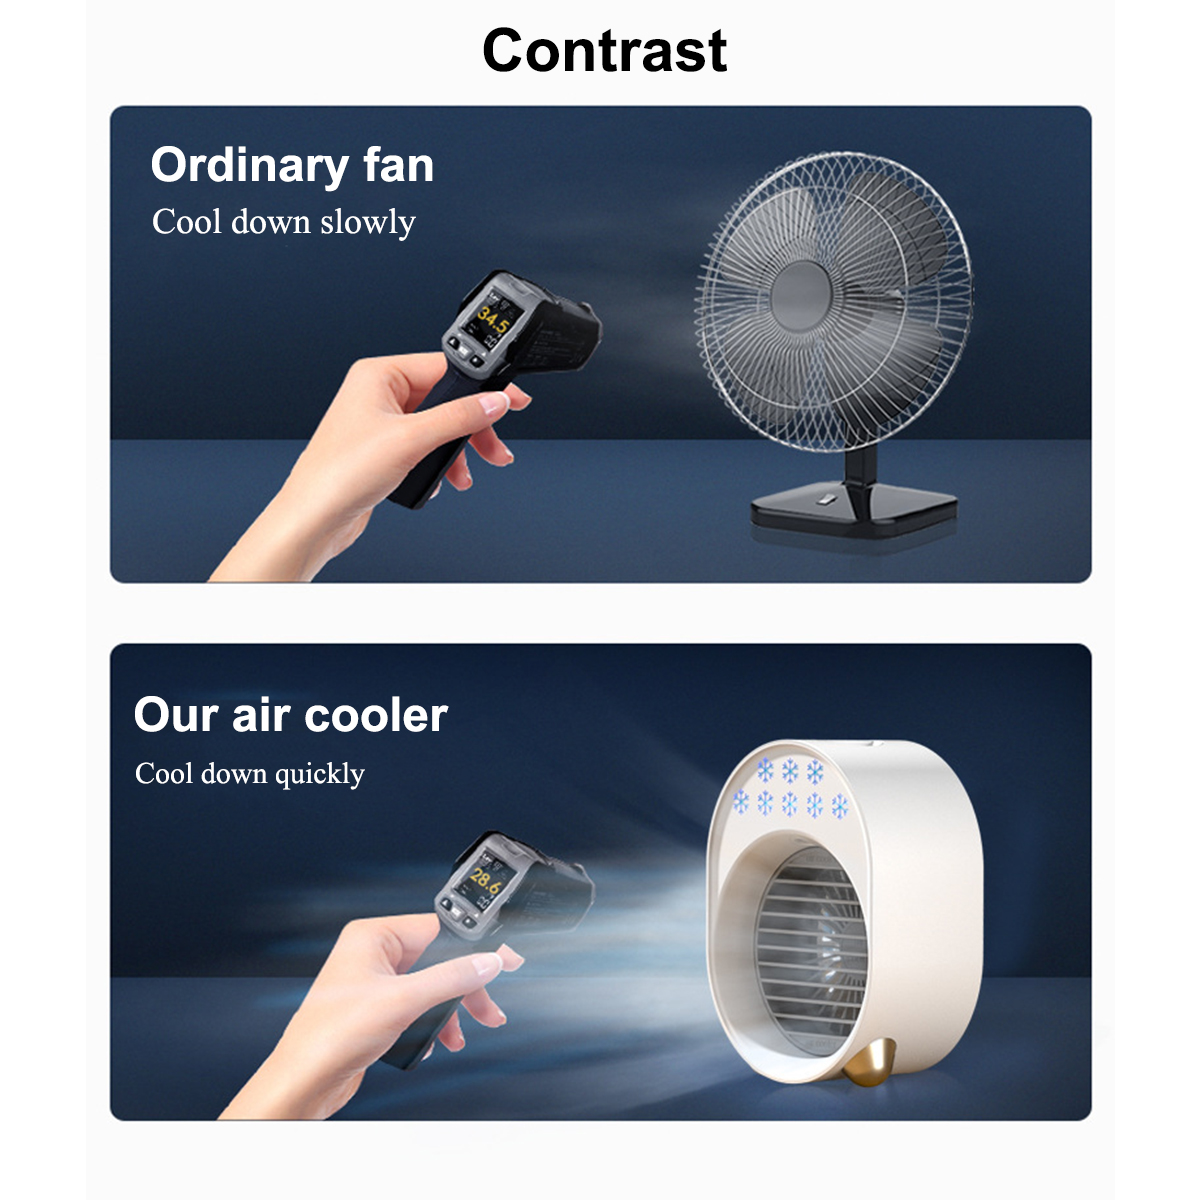 Bakeey-3-Gear-Mini-Water-Cooling-Fan-Spray-Humidification-Portable-Colorful-Night-Light-Air-Cooler-T-1838417-6